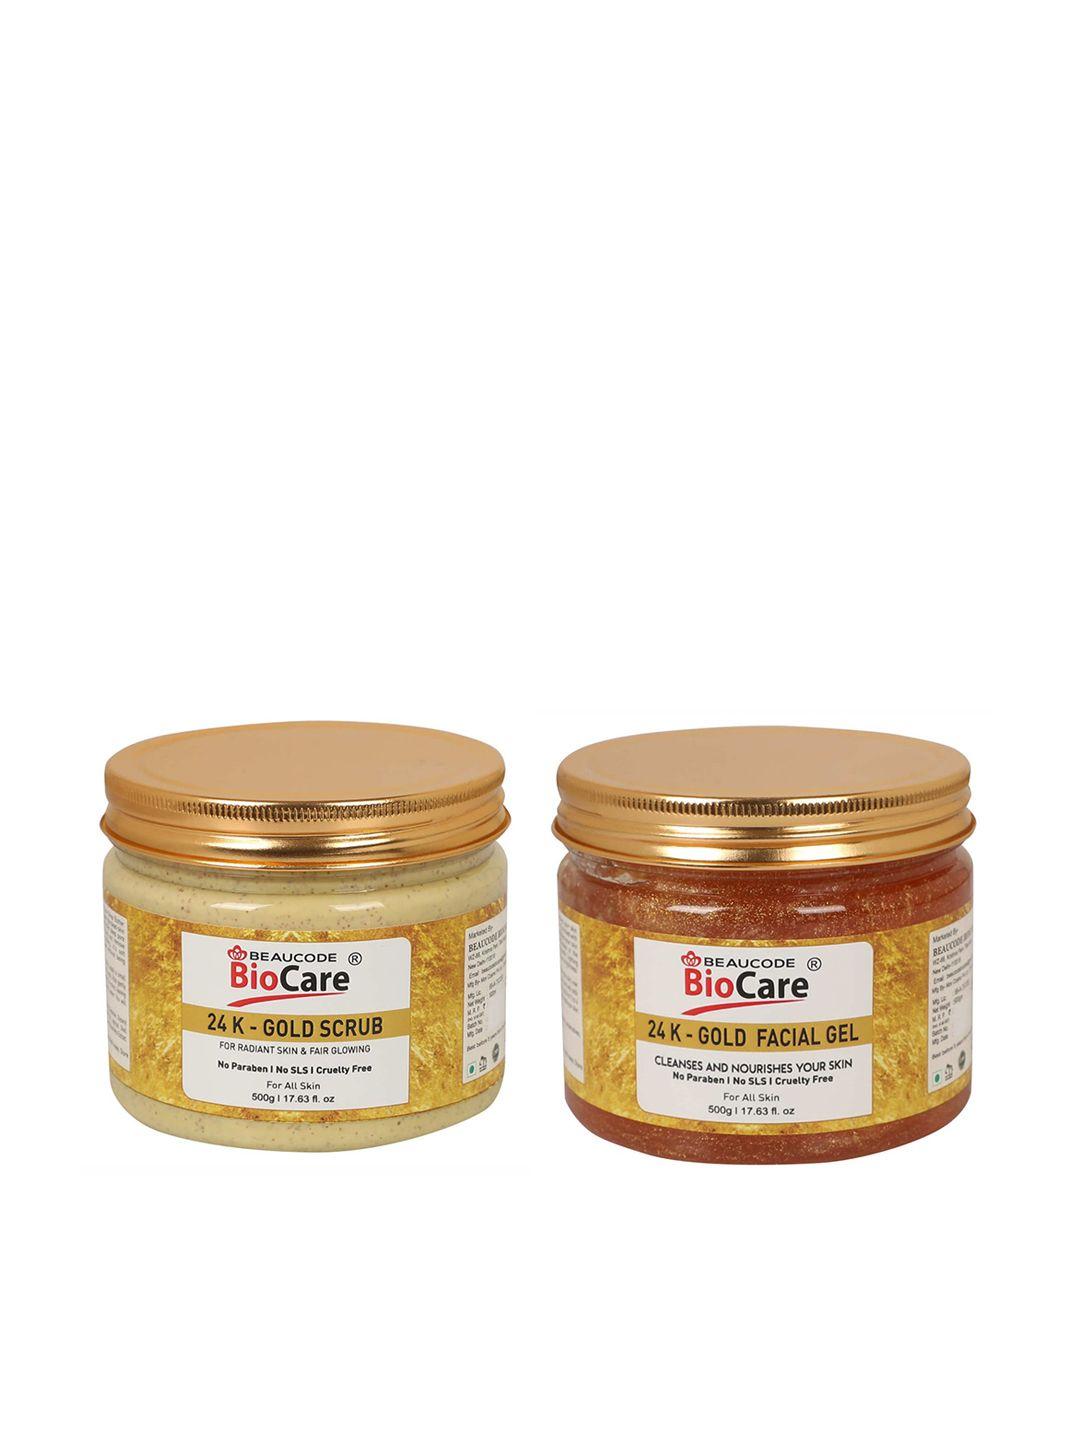 beaucode-biocare-set-of-2-24k-gold-face-and-body-scrub-and-gel-1kg